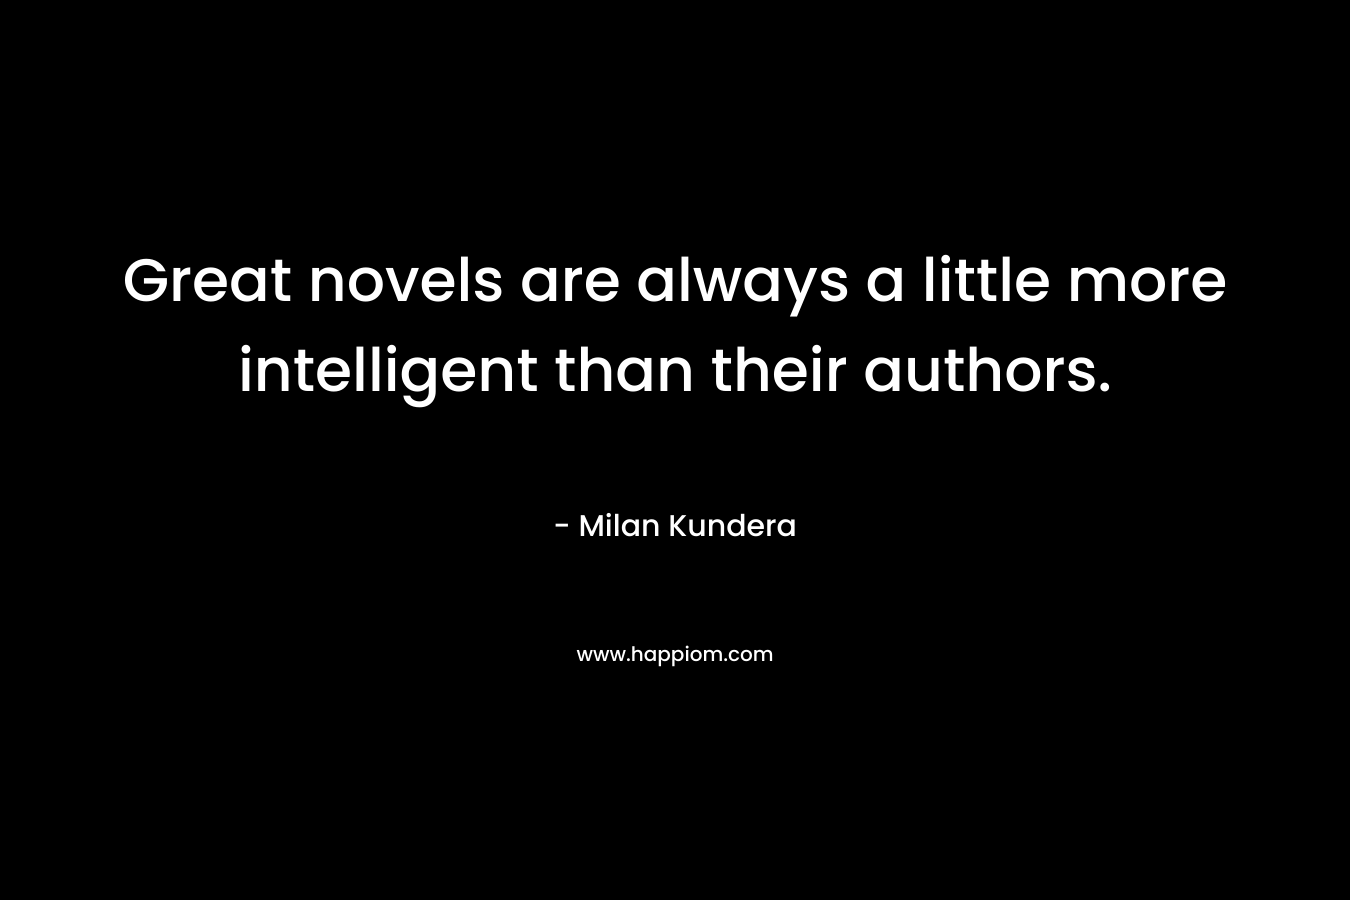 Great novels are always a little more intelligent than their authors.